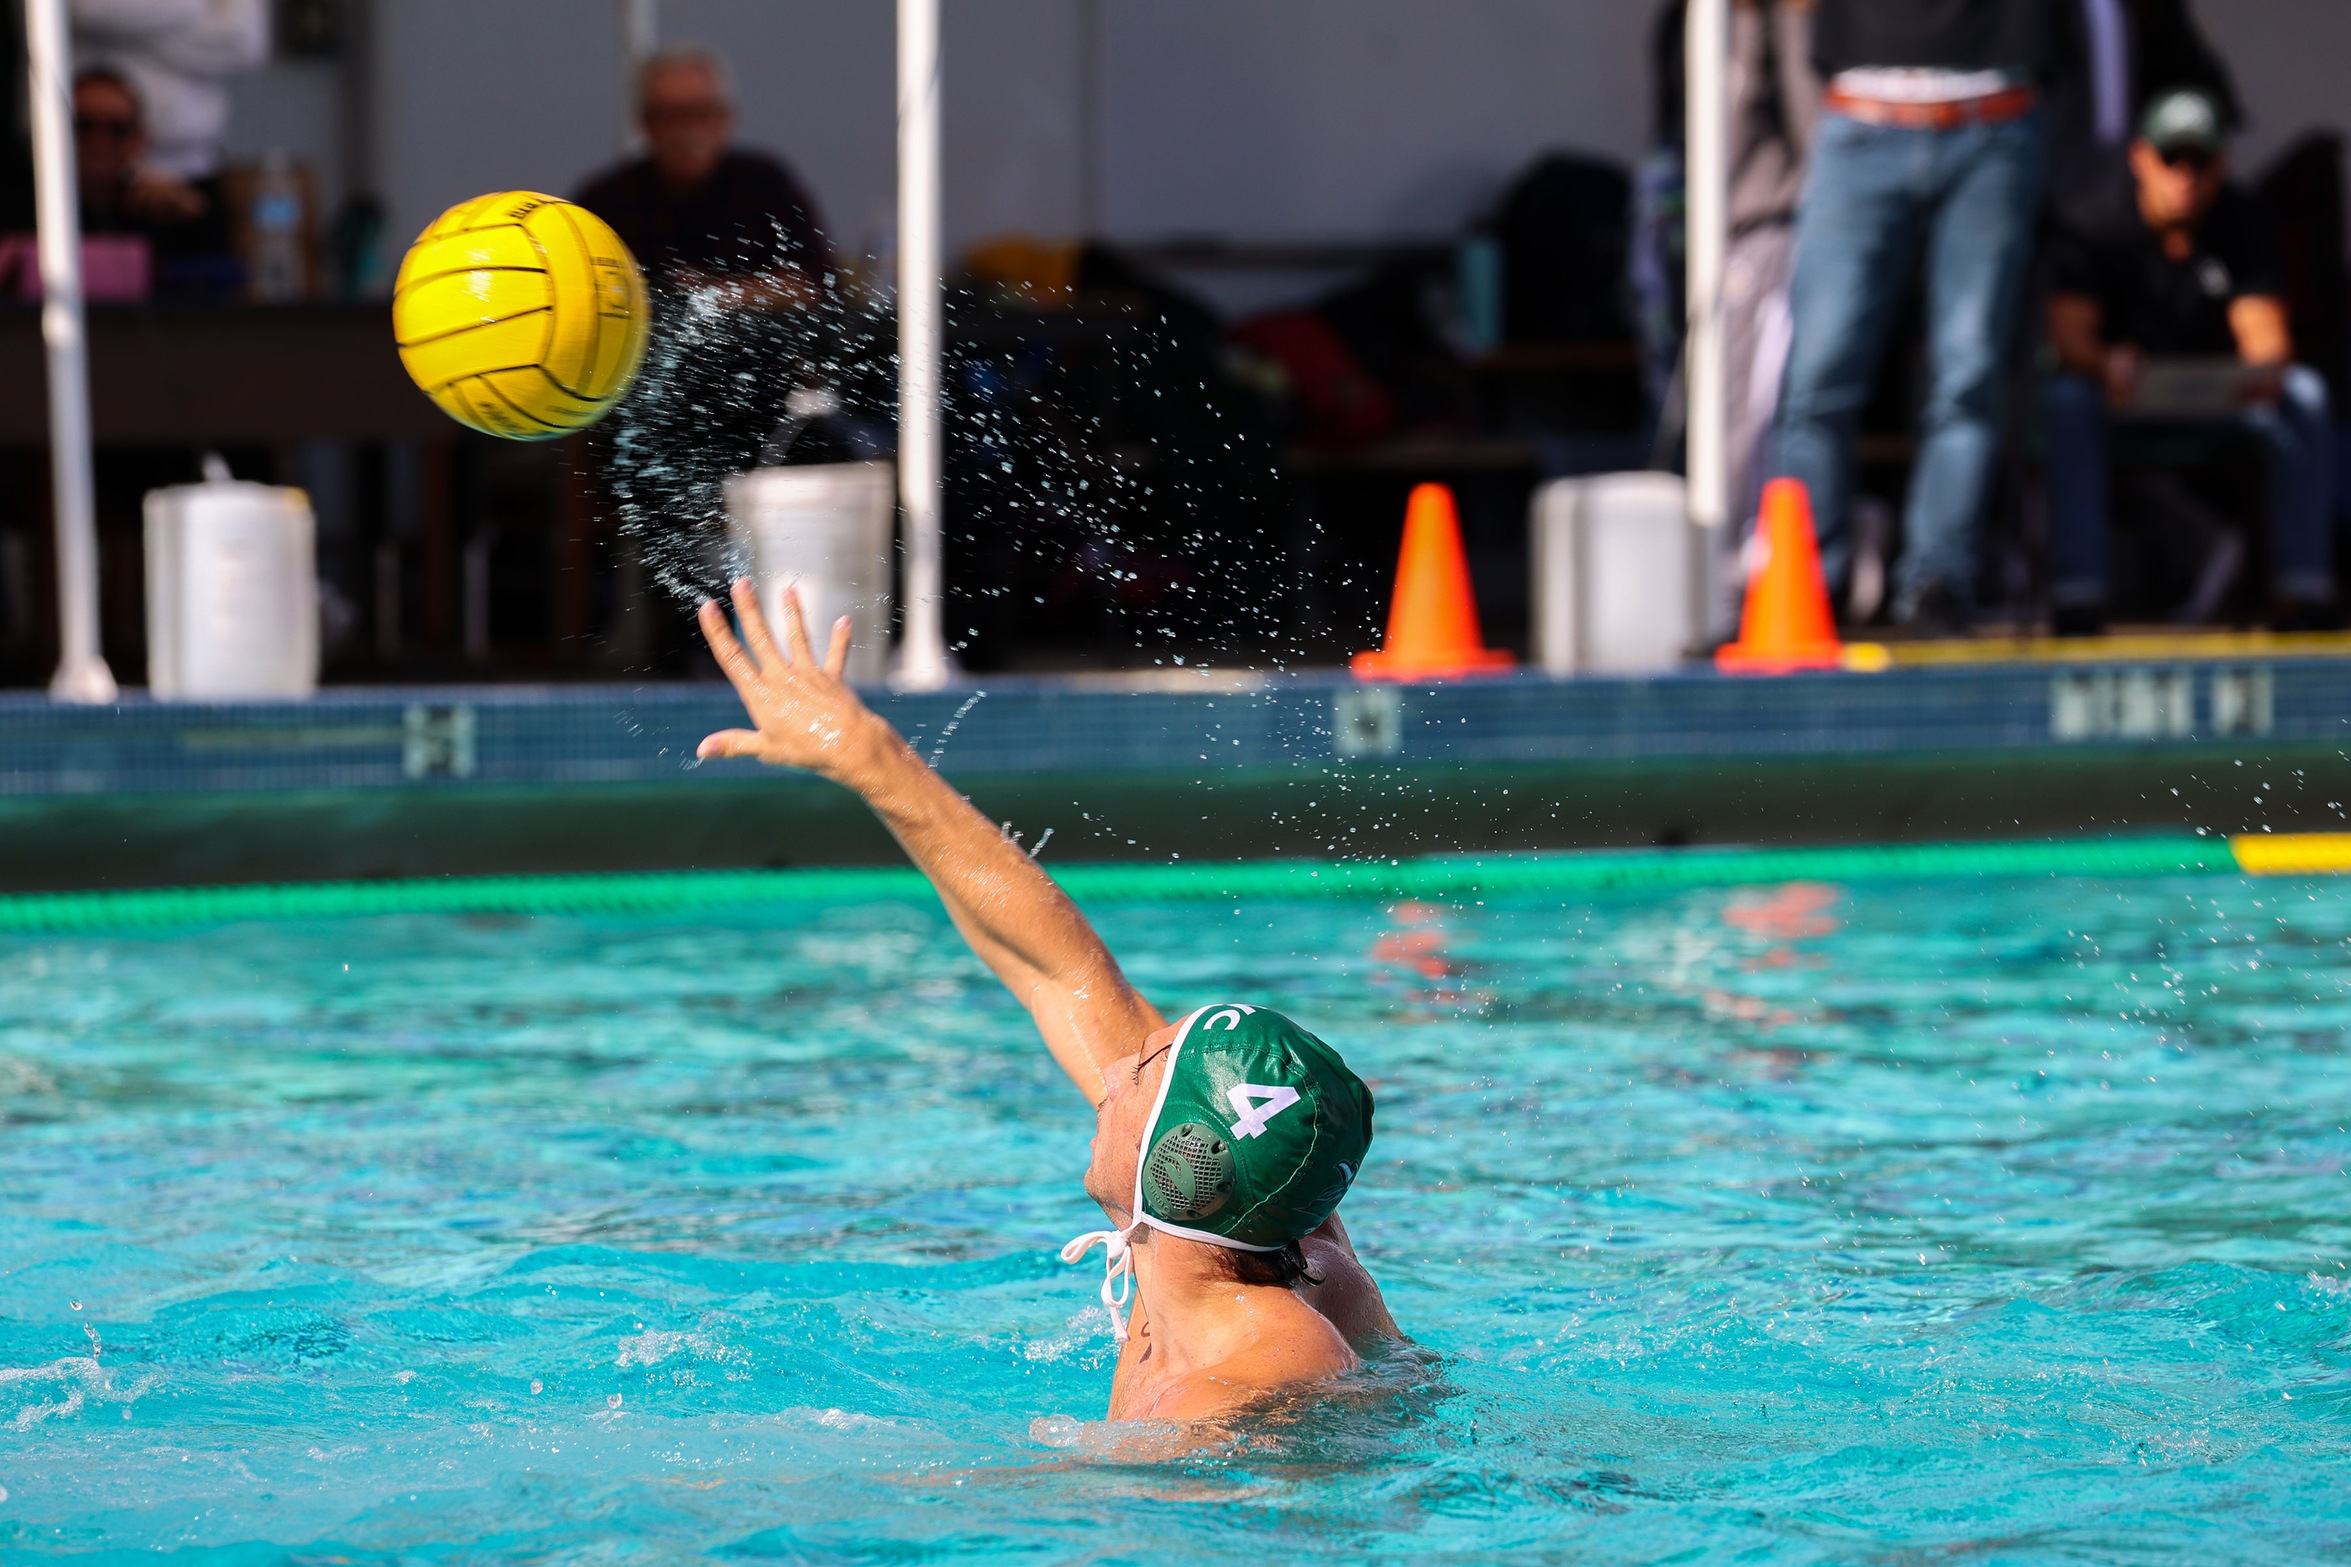 Men's Water Polo finishes season at the CCCAA NorCal Championships with close 13-12 loss to Modesto